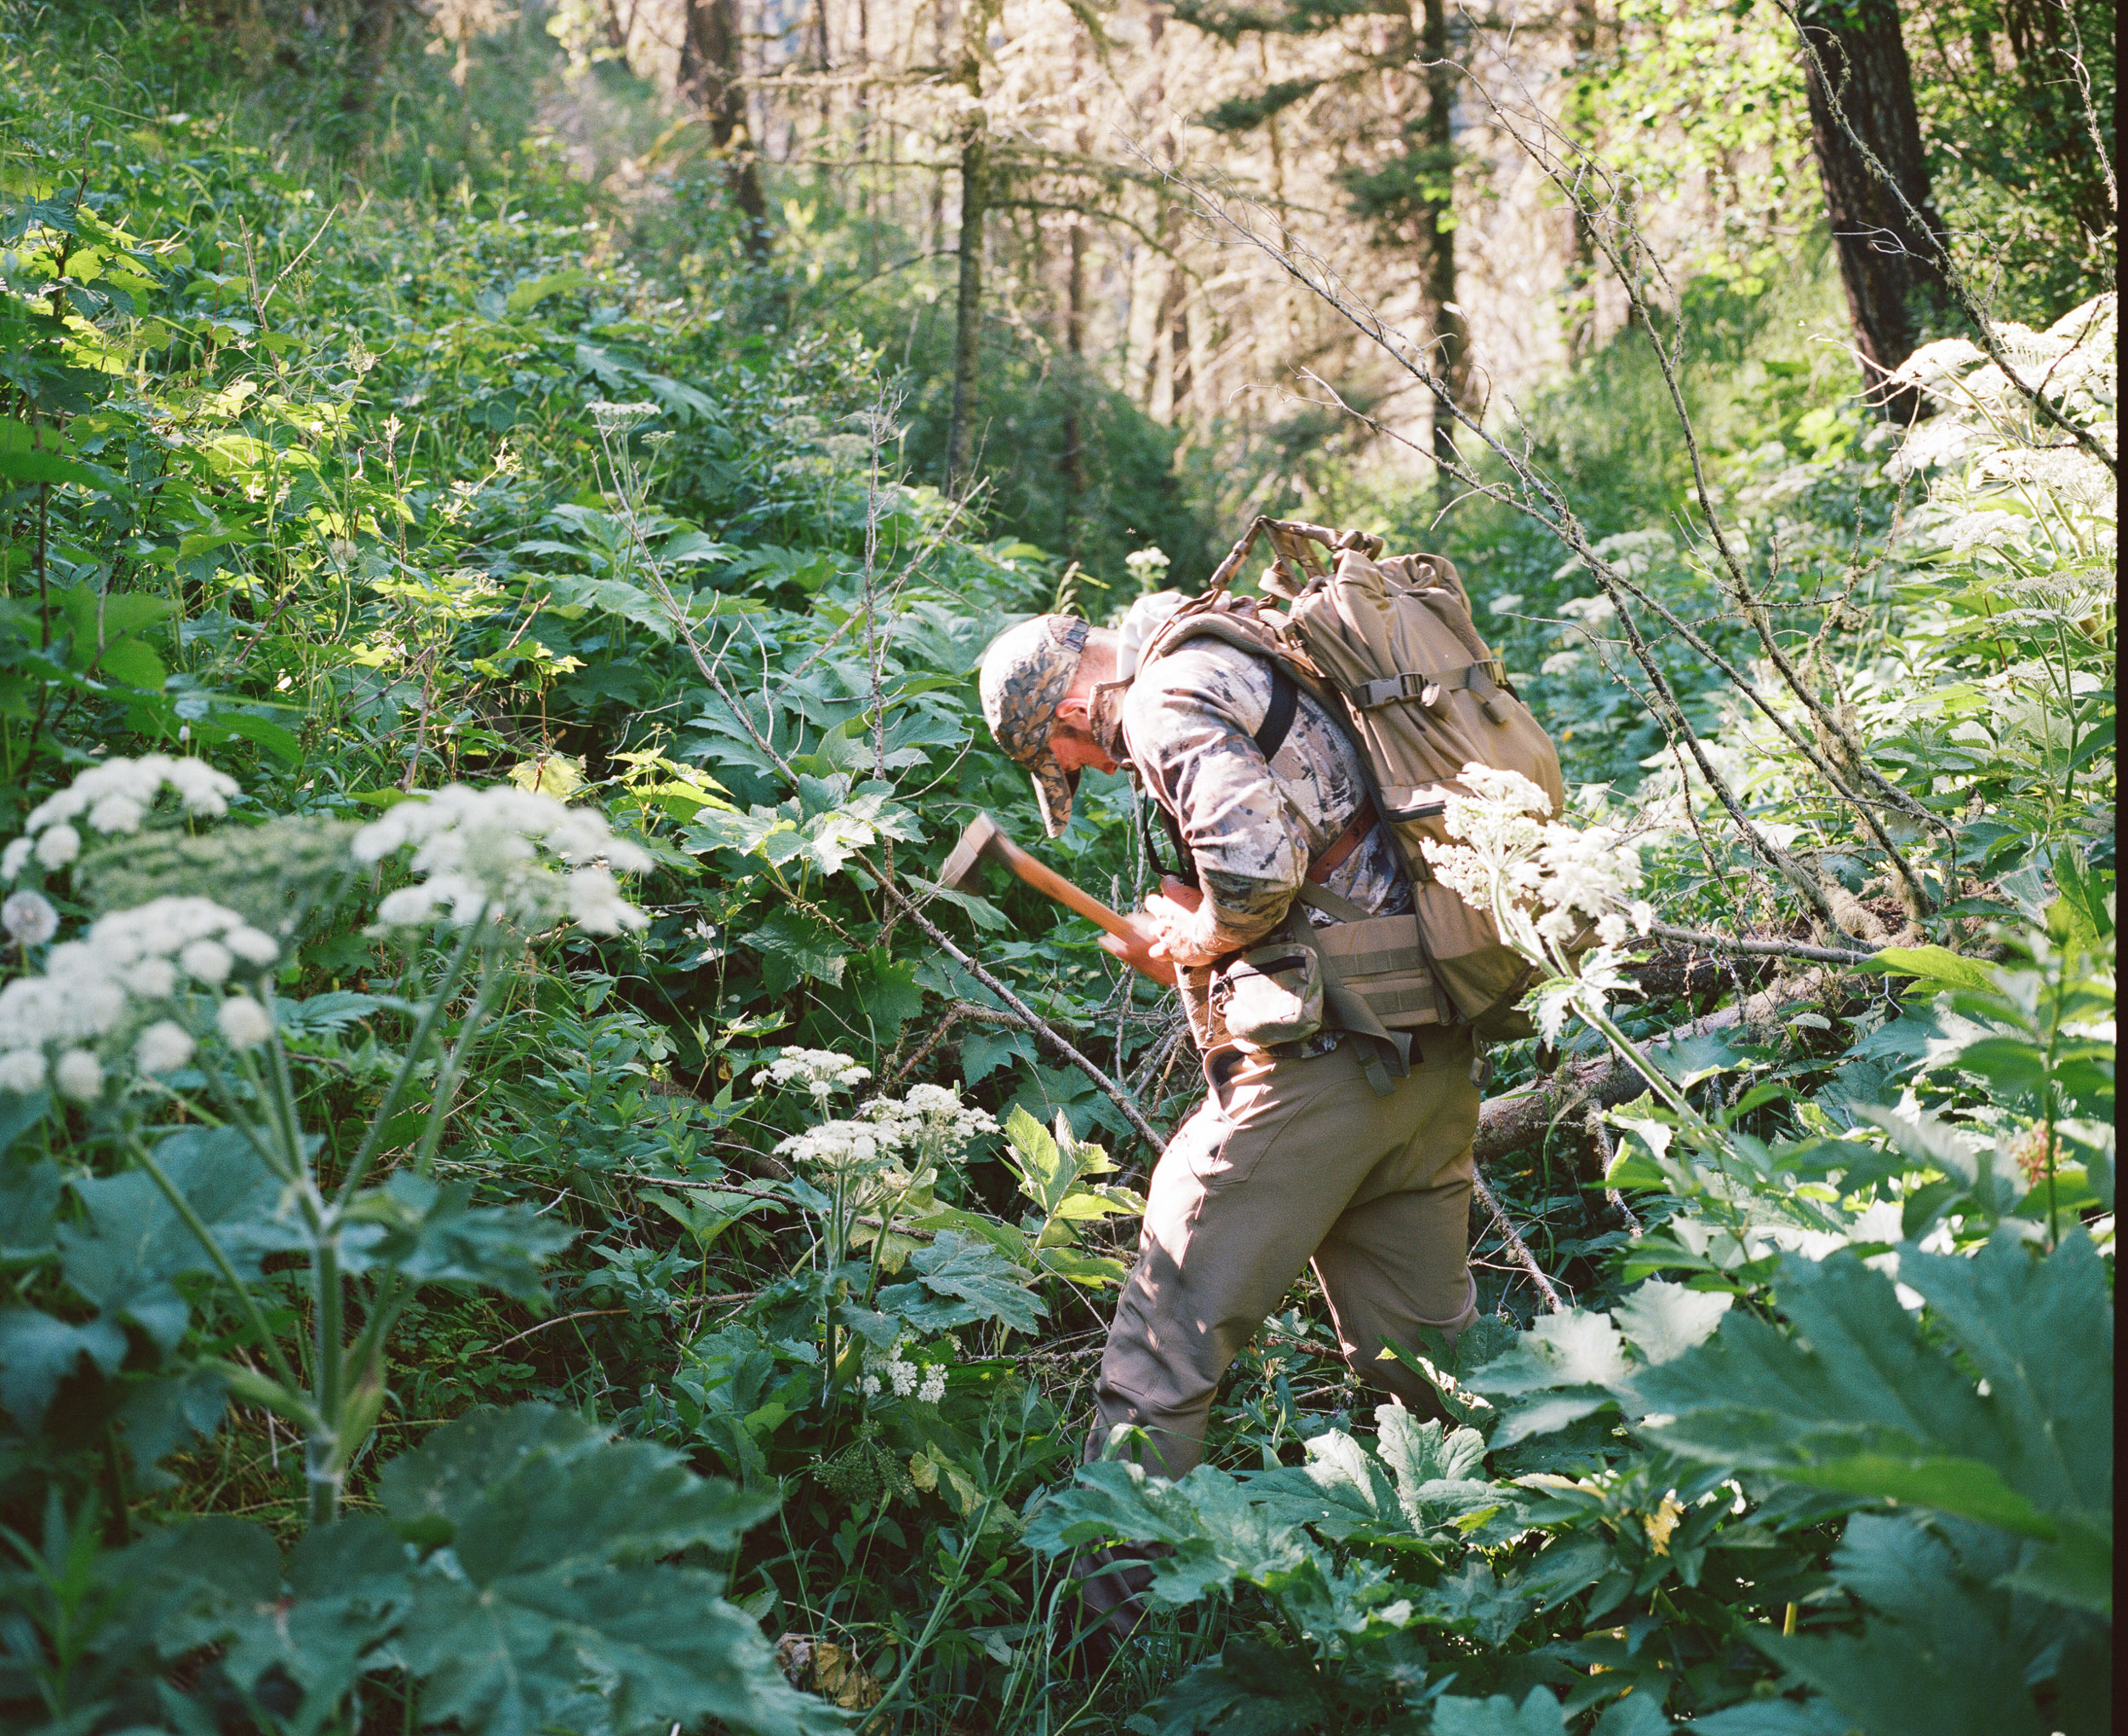 Hunter with a hatchet chopping and surrounded by grasses and flowers